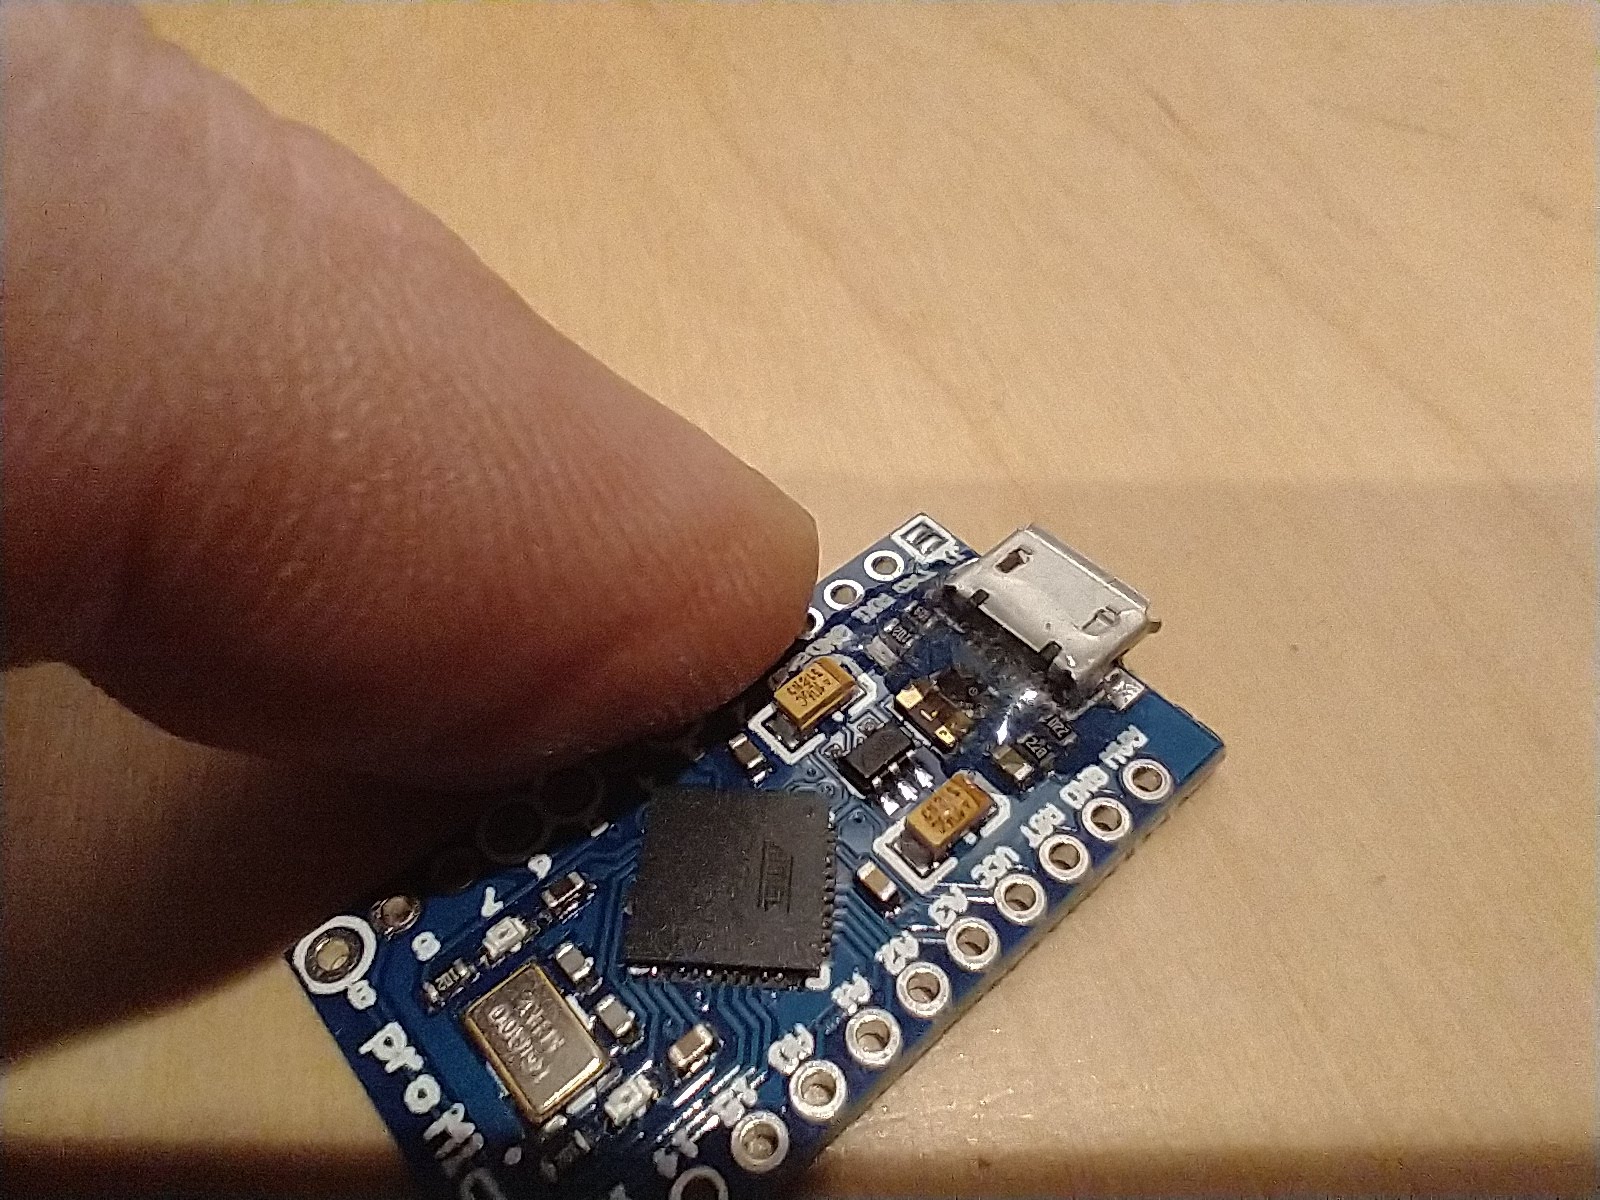 Is this original pro micro from Arduino or just another ripoff